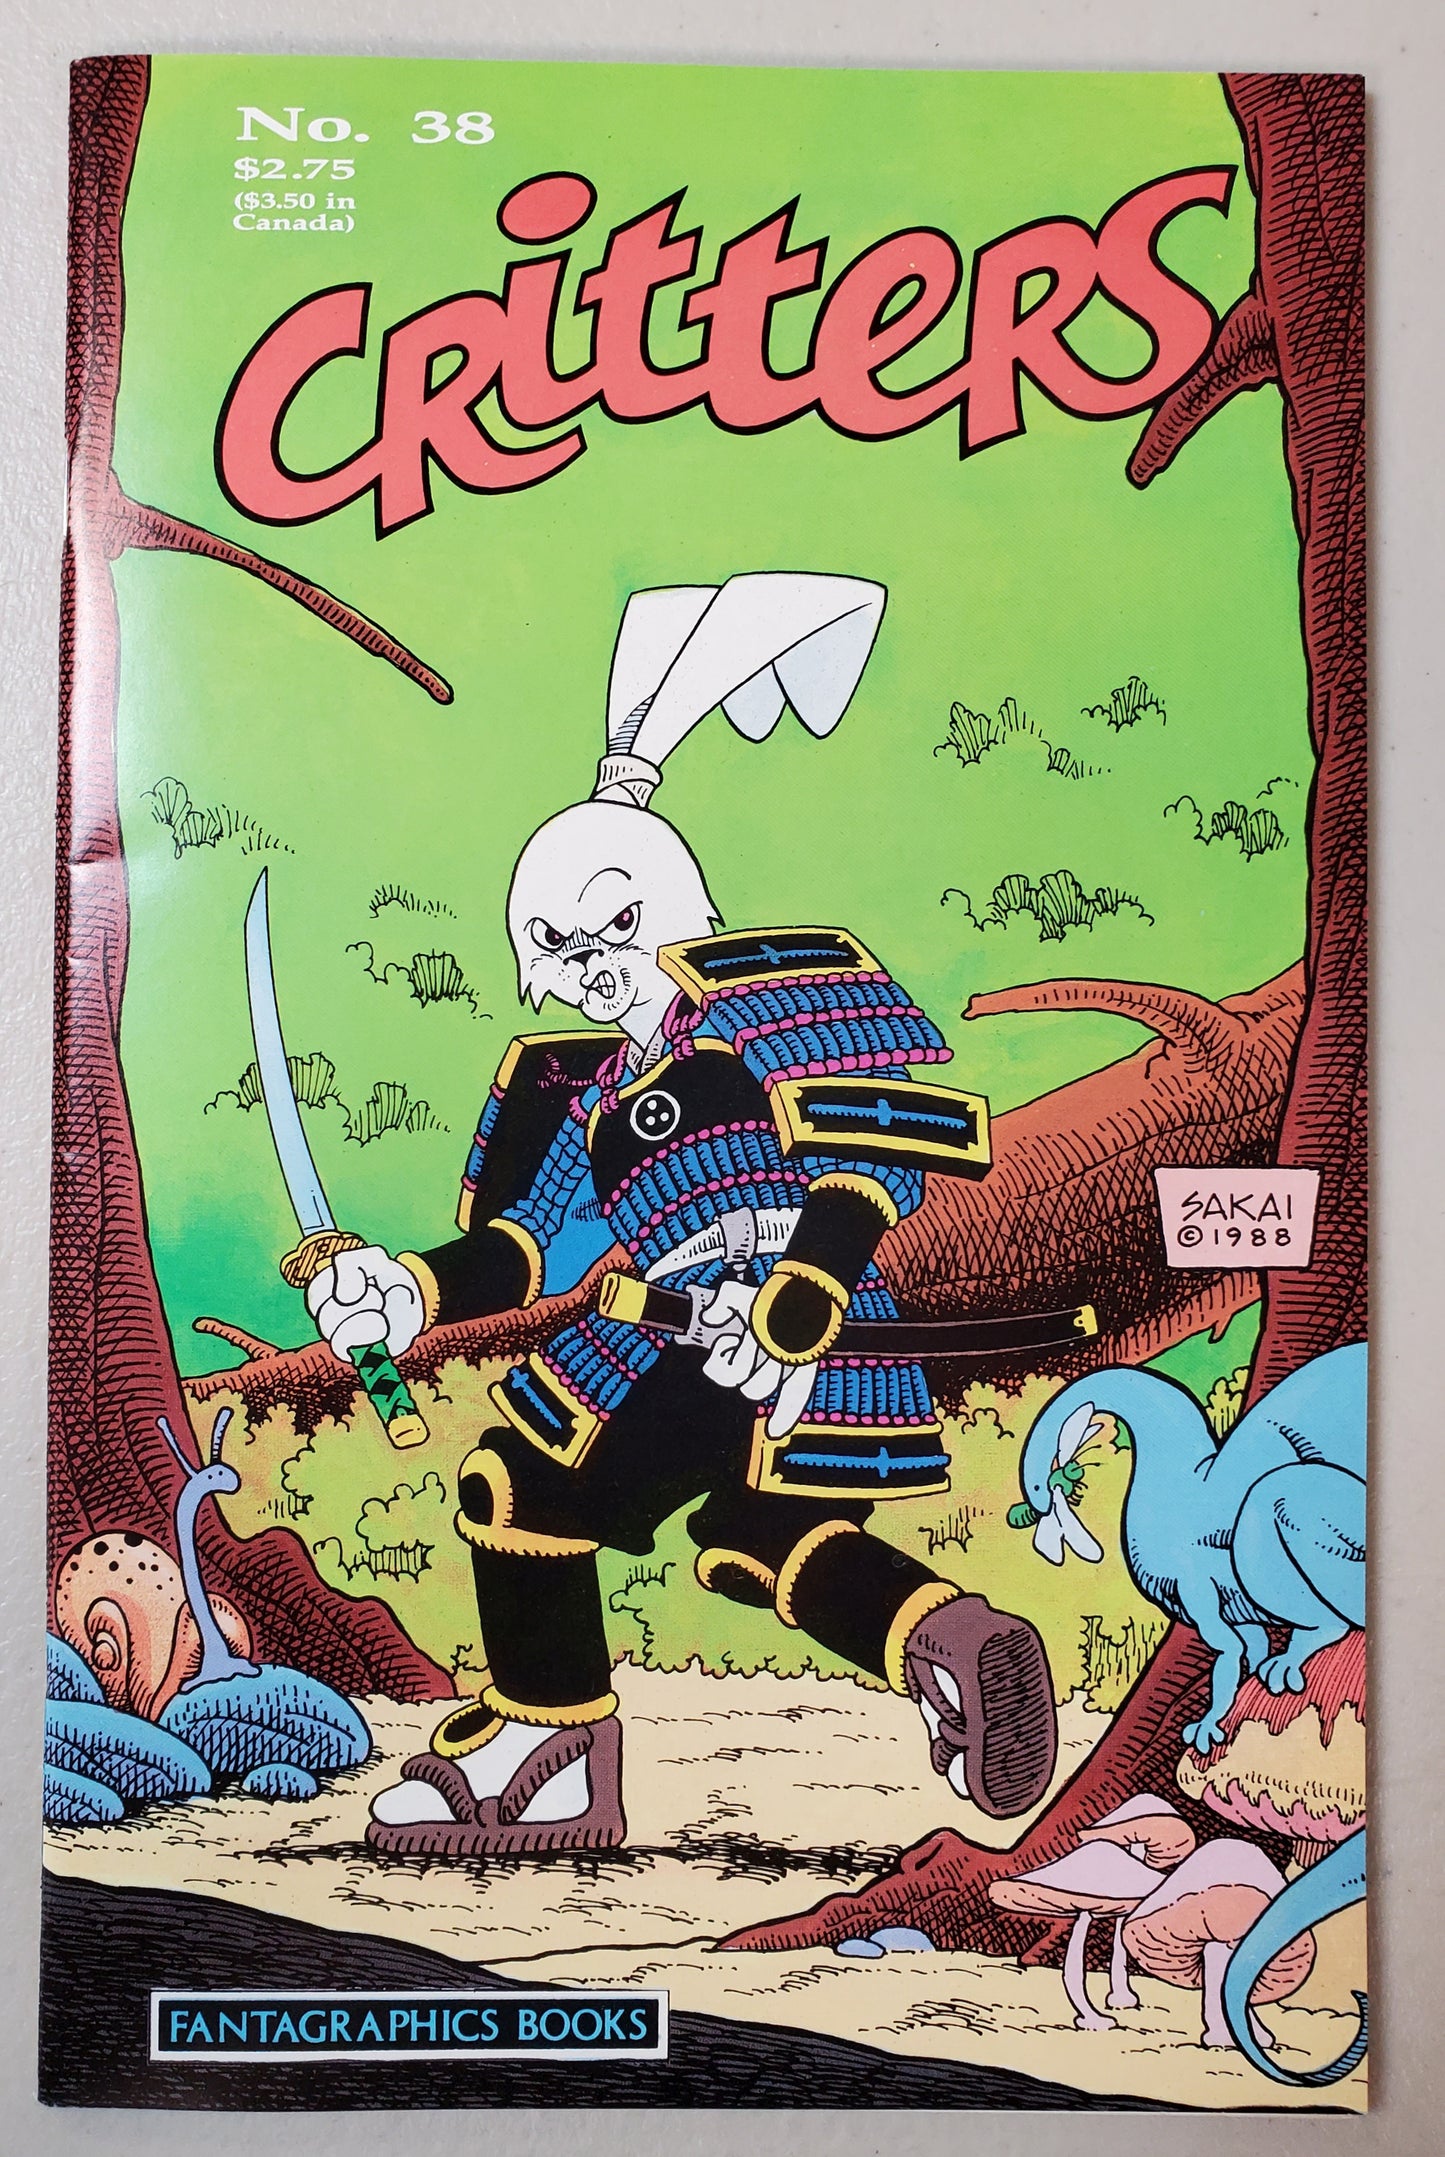 CRITTERS #38 SIGNED BY STAN SAKAI